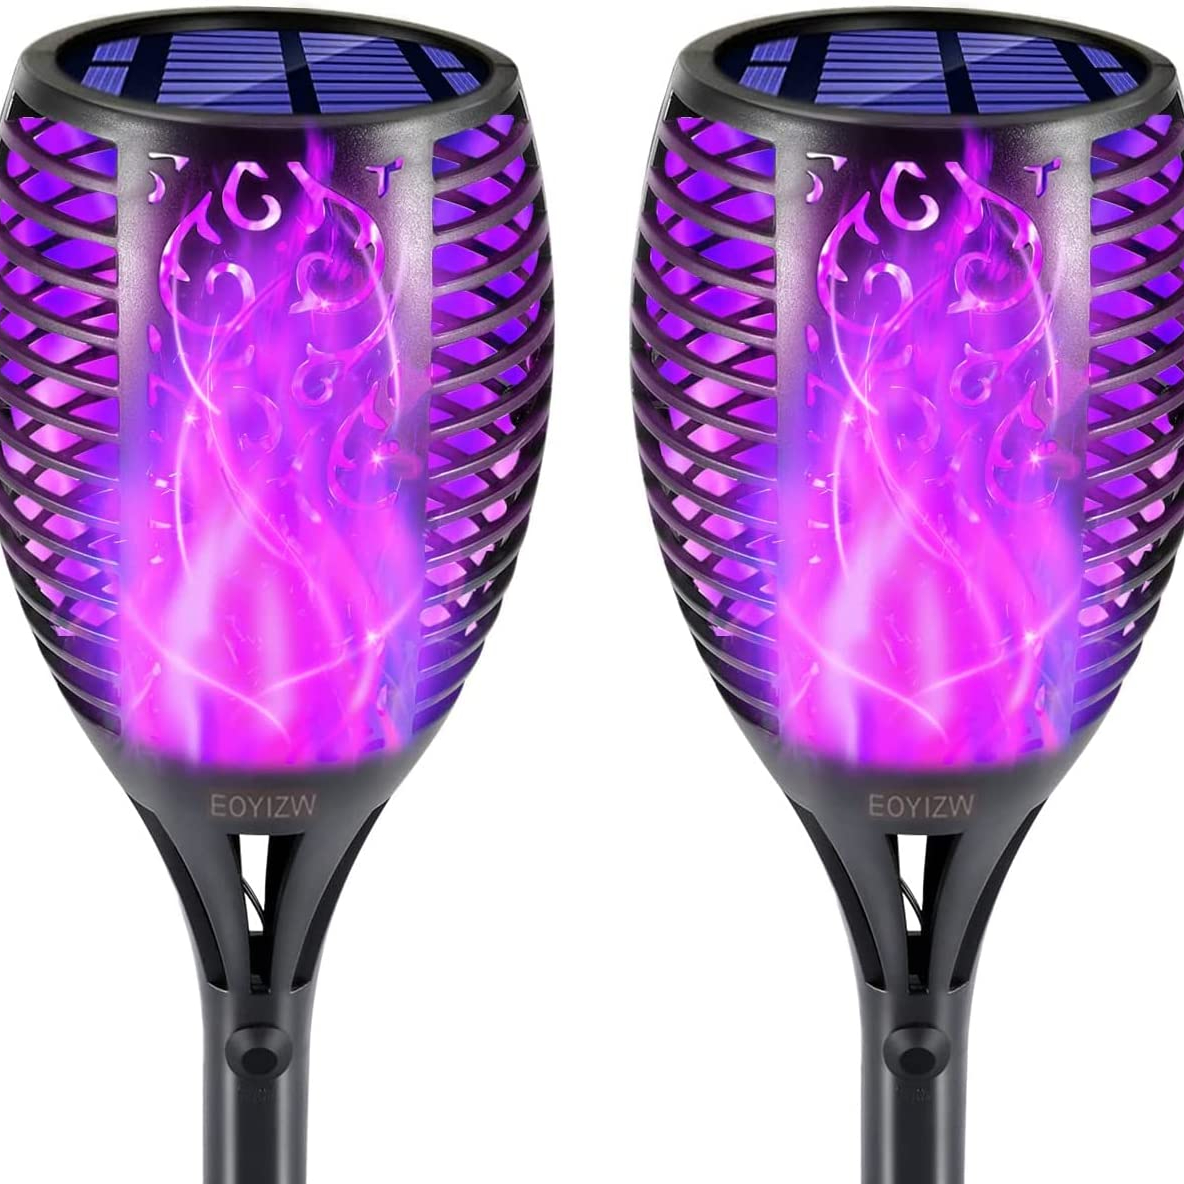 EOYIZW Solar Outdoor Lights, 43" (2 Pack) Purple Flickering Flame Halloween Decorations Solar Lights -IP65 Waterproof Solar Tiki Torches for Outside Halloween Decor for Garden Porch Yard Patio